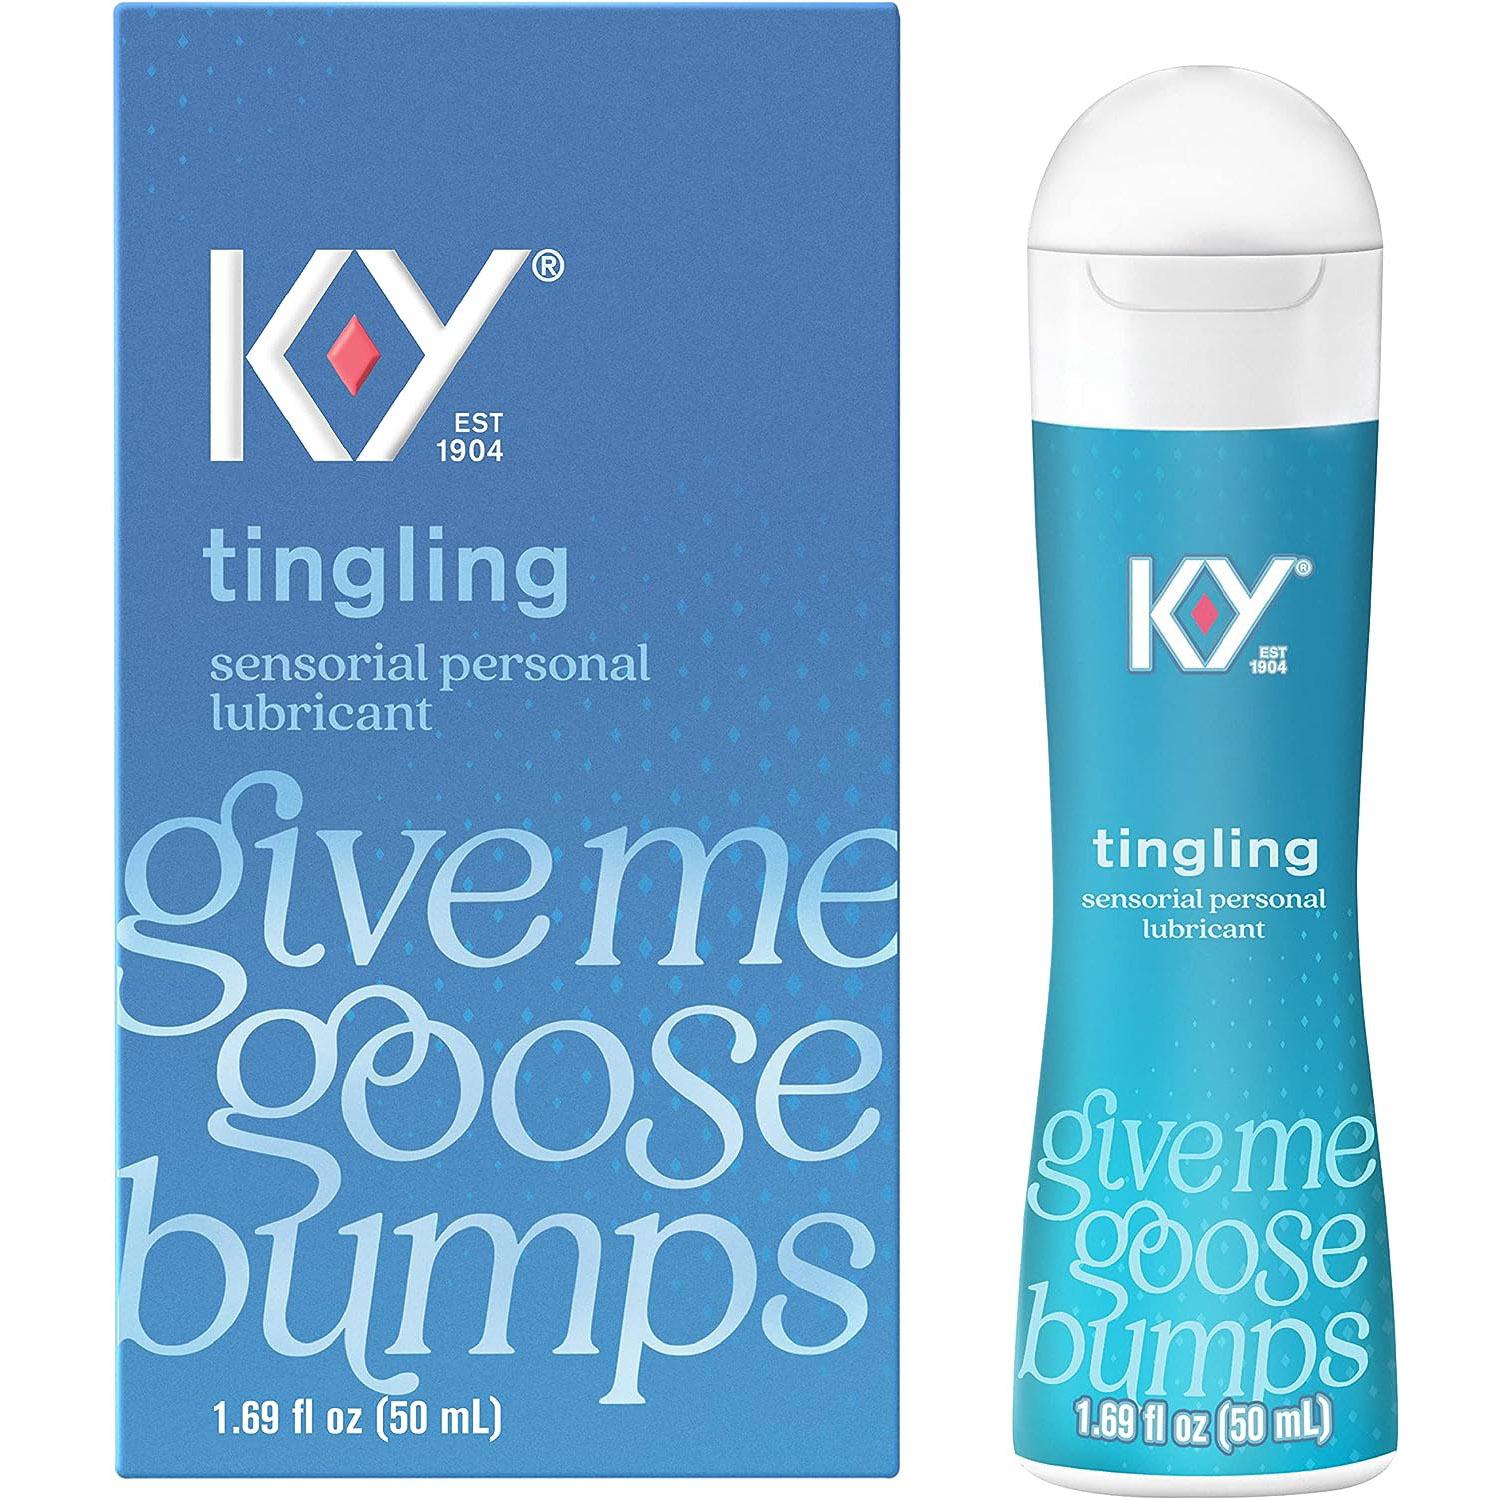 K-Y Tingling Water Based Lube Sensorial Personal Lubricant for $4.84